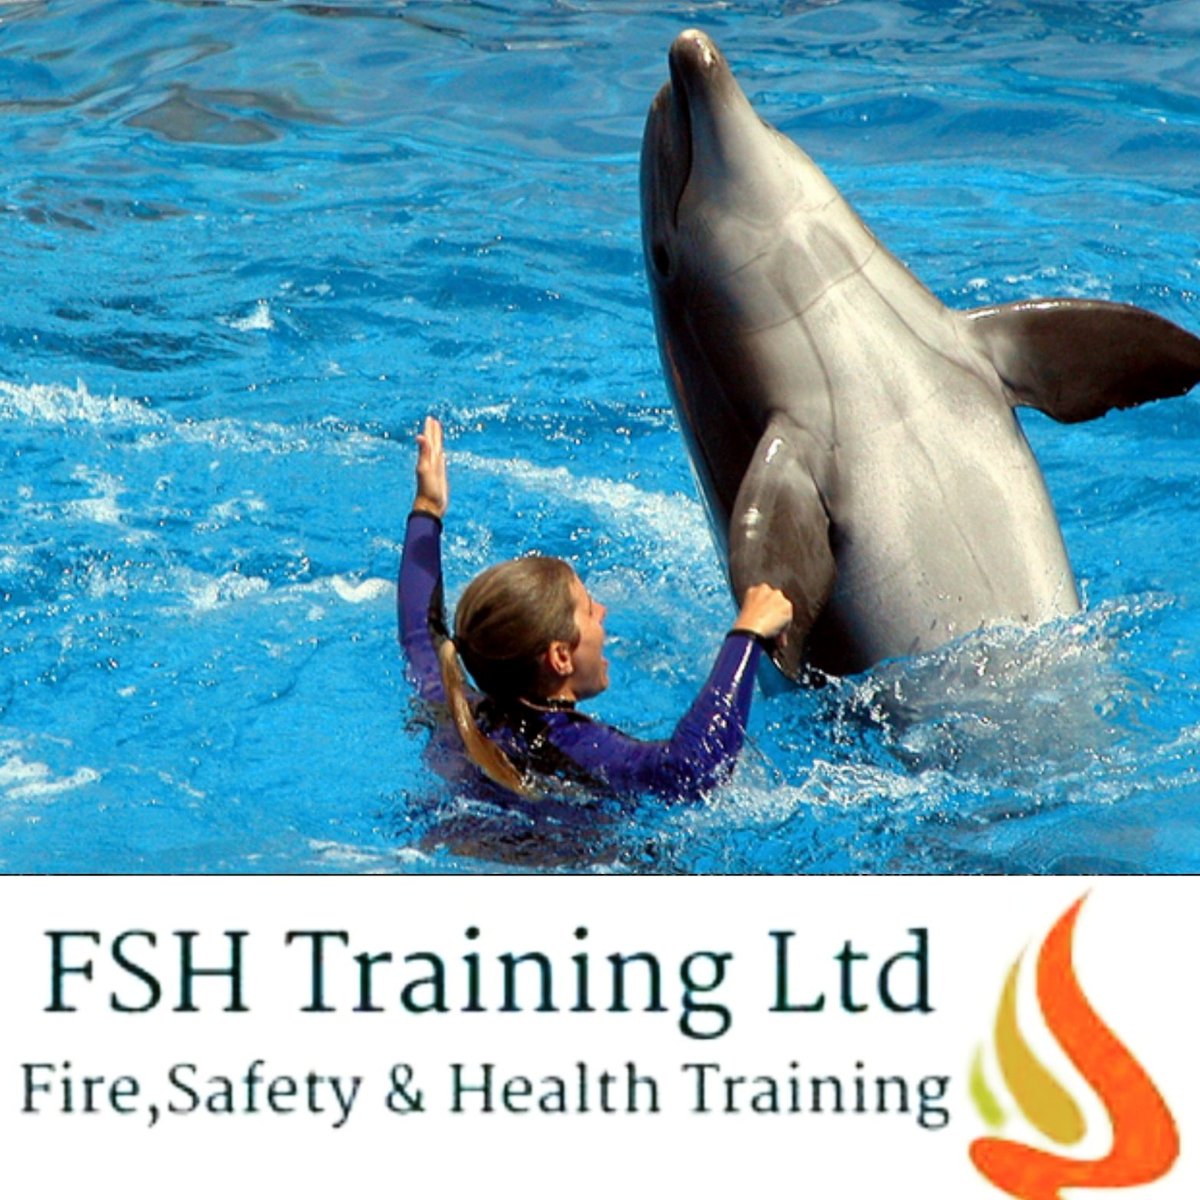 We are delighted to finally be able to reveal our new Dolphin Training course that will be held on the Royal Canal each Saturday for the month of April #DolphinTraining #BecomeADolphinTrainer #RoyalCanal #AprilSpecial